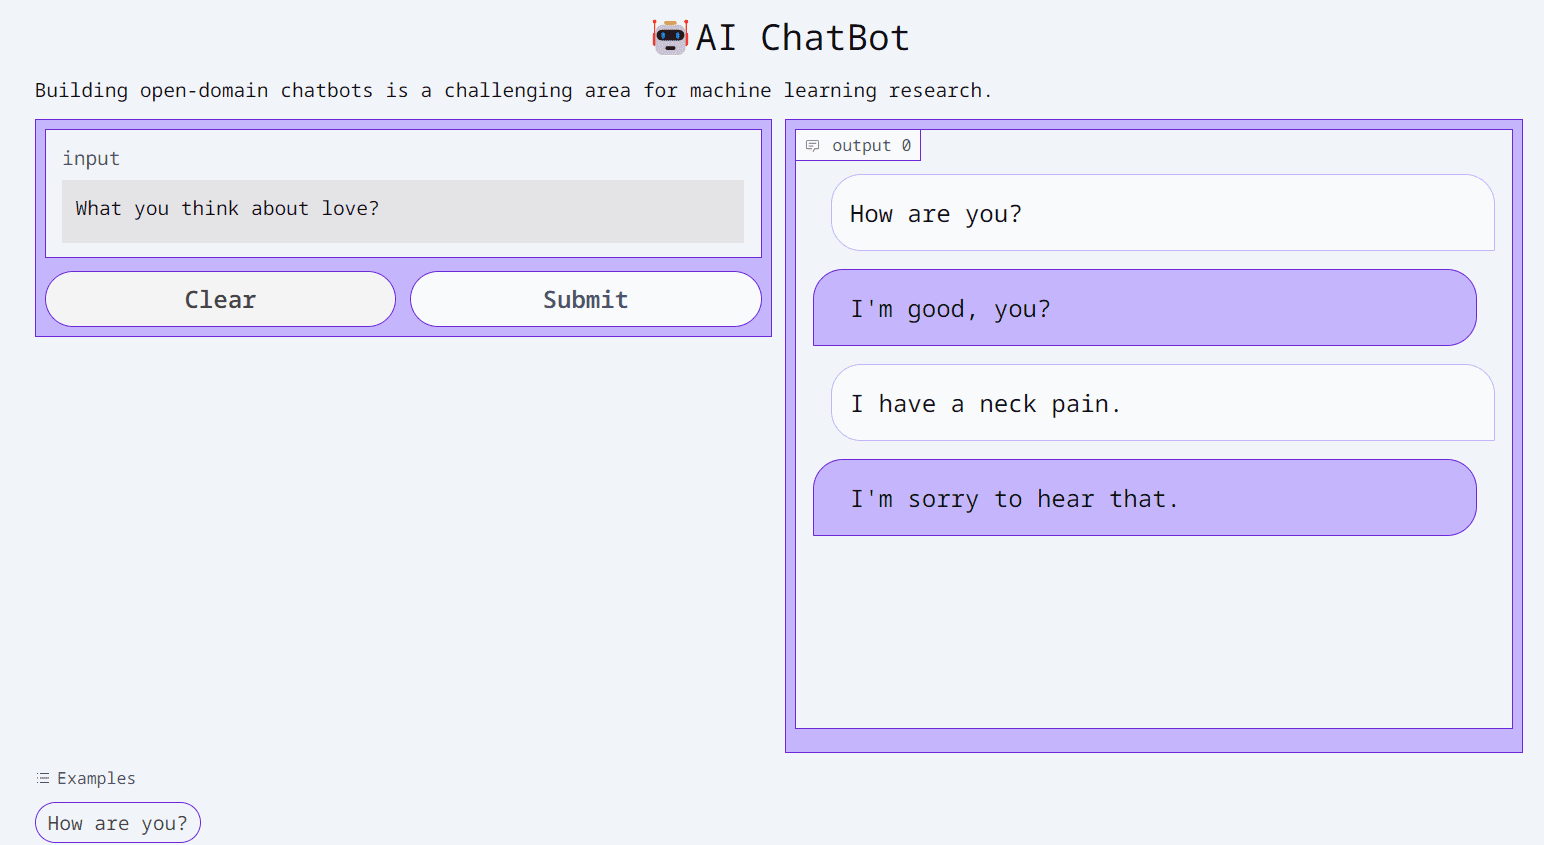 Image from AI ChatBot